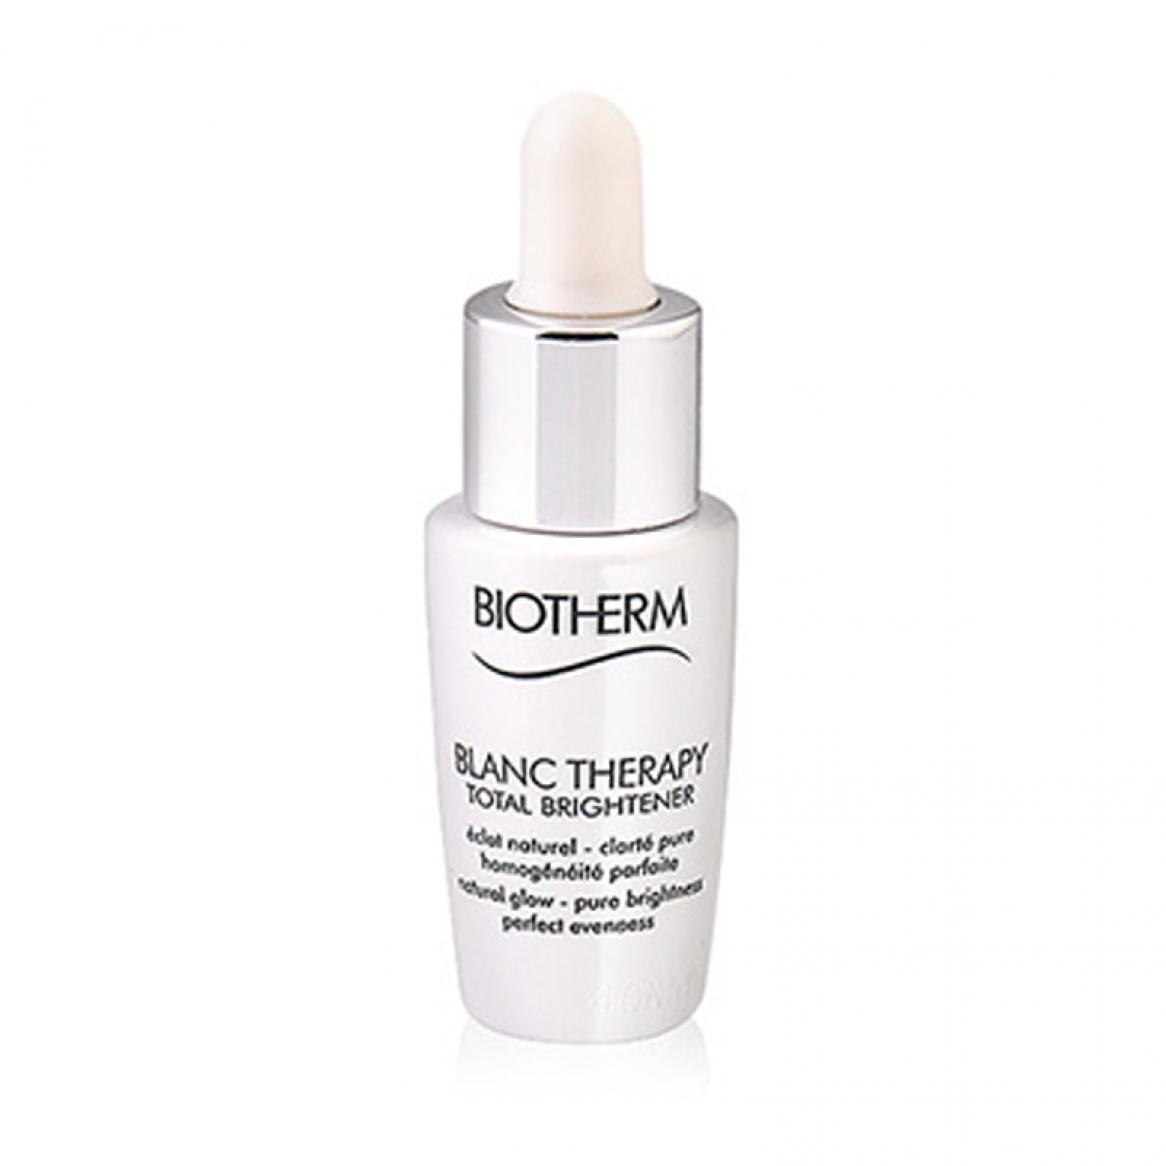 Biotherm Blanc Therapy Total Brightener 7ml